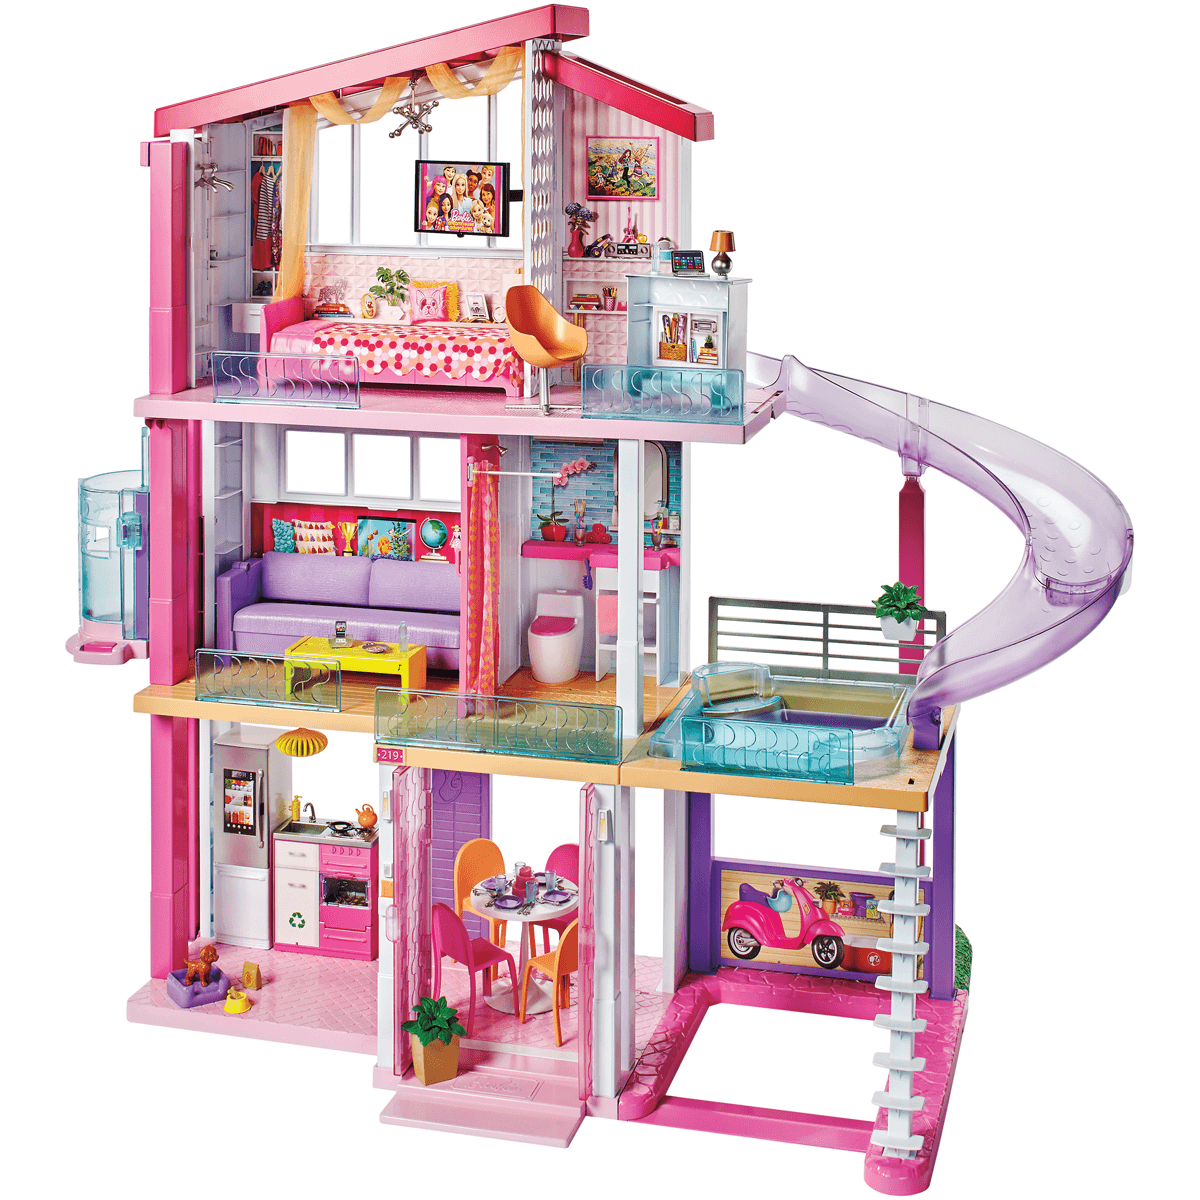 Barbie Deluxe Playset | The Entertainer